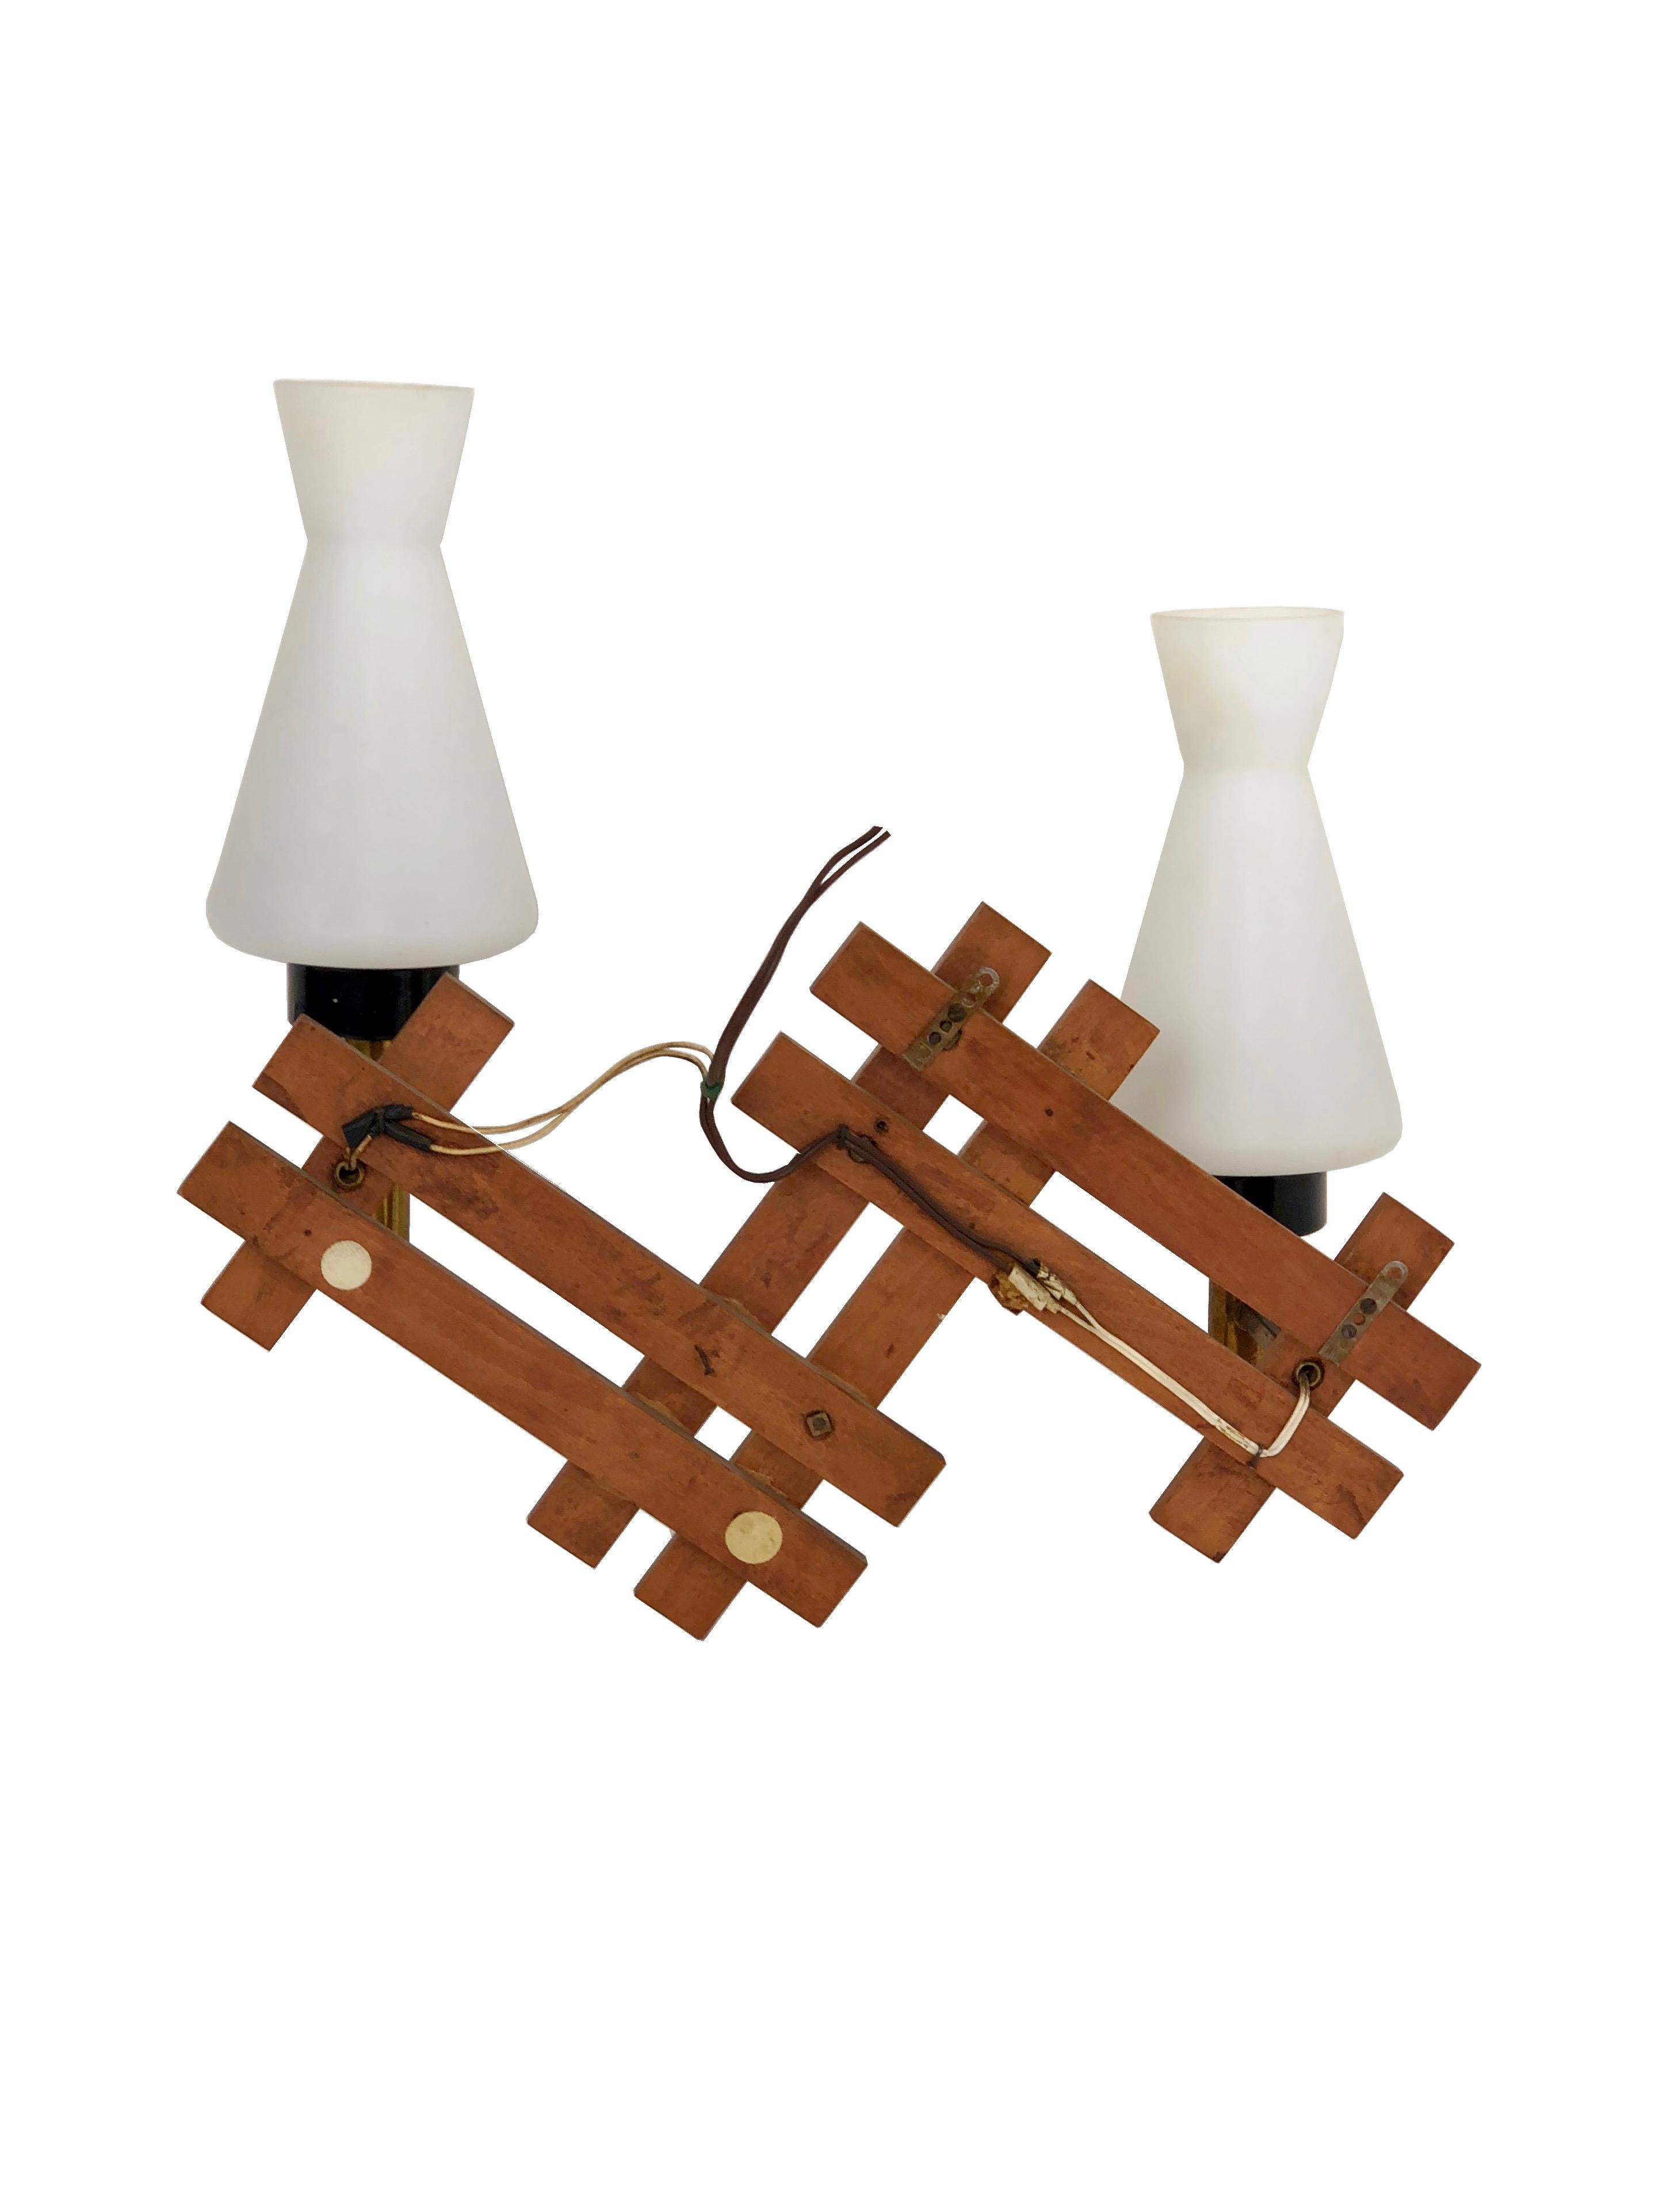 Teak and brass wall sconces featuring two lights in opaline glass, made in Italy during the 1960s.